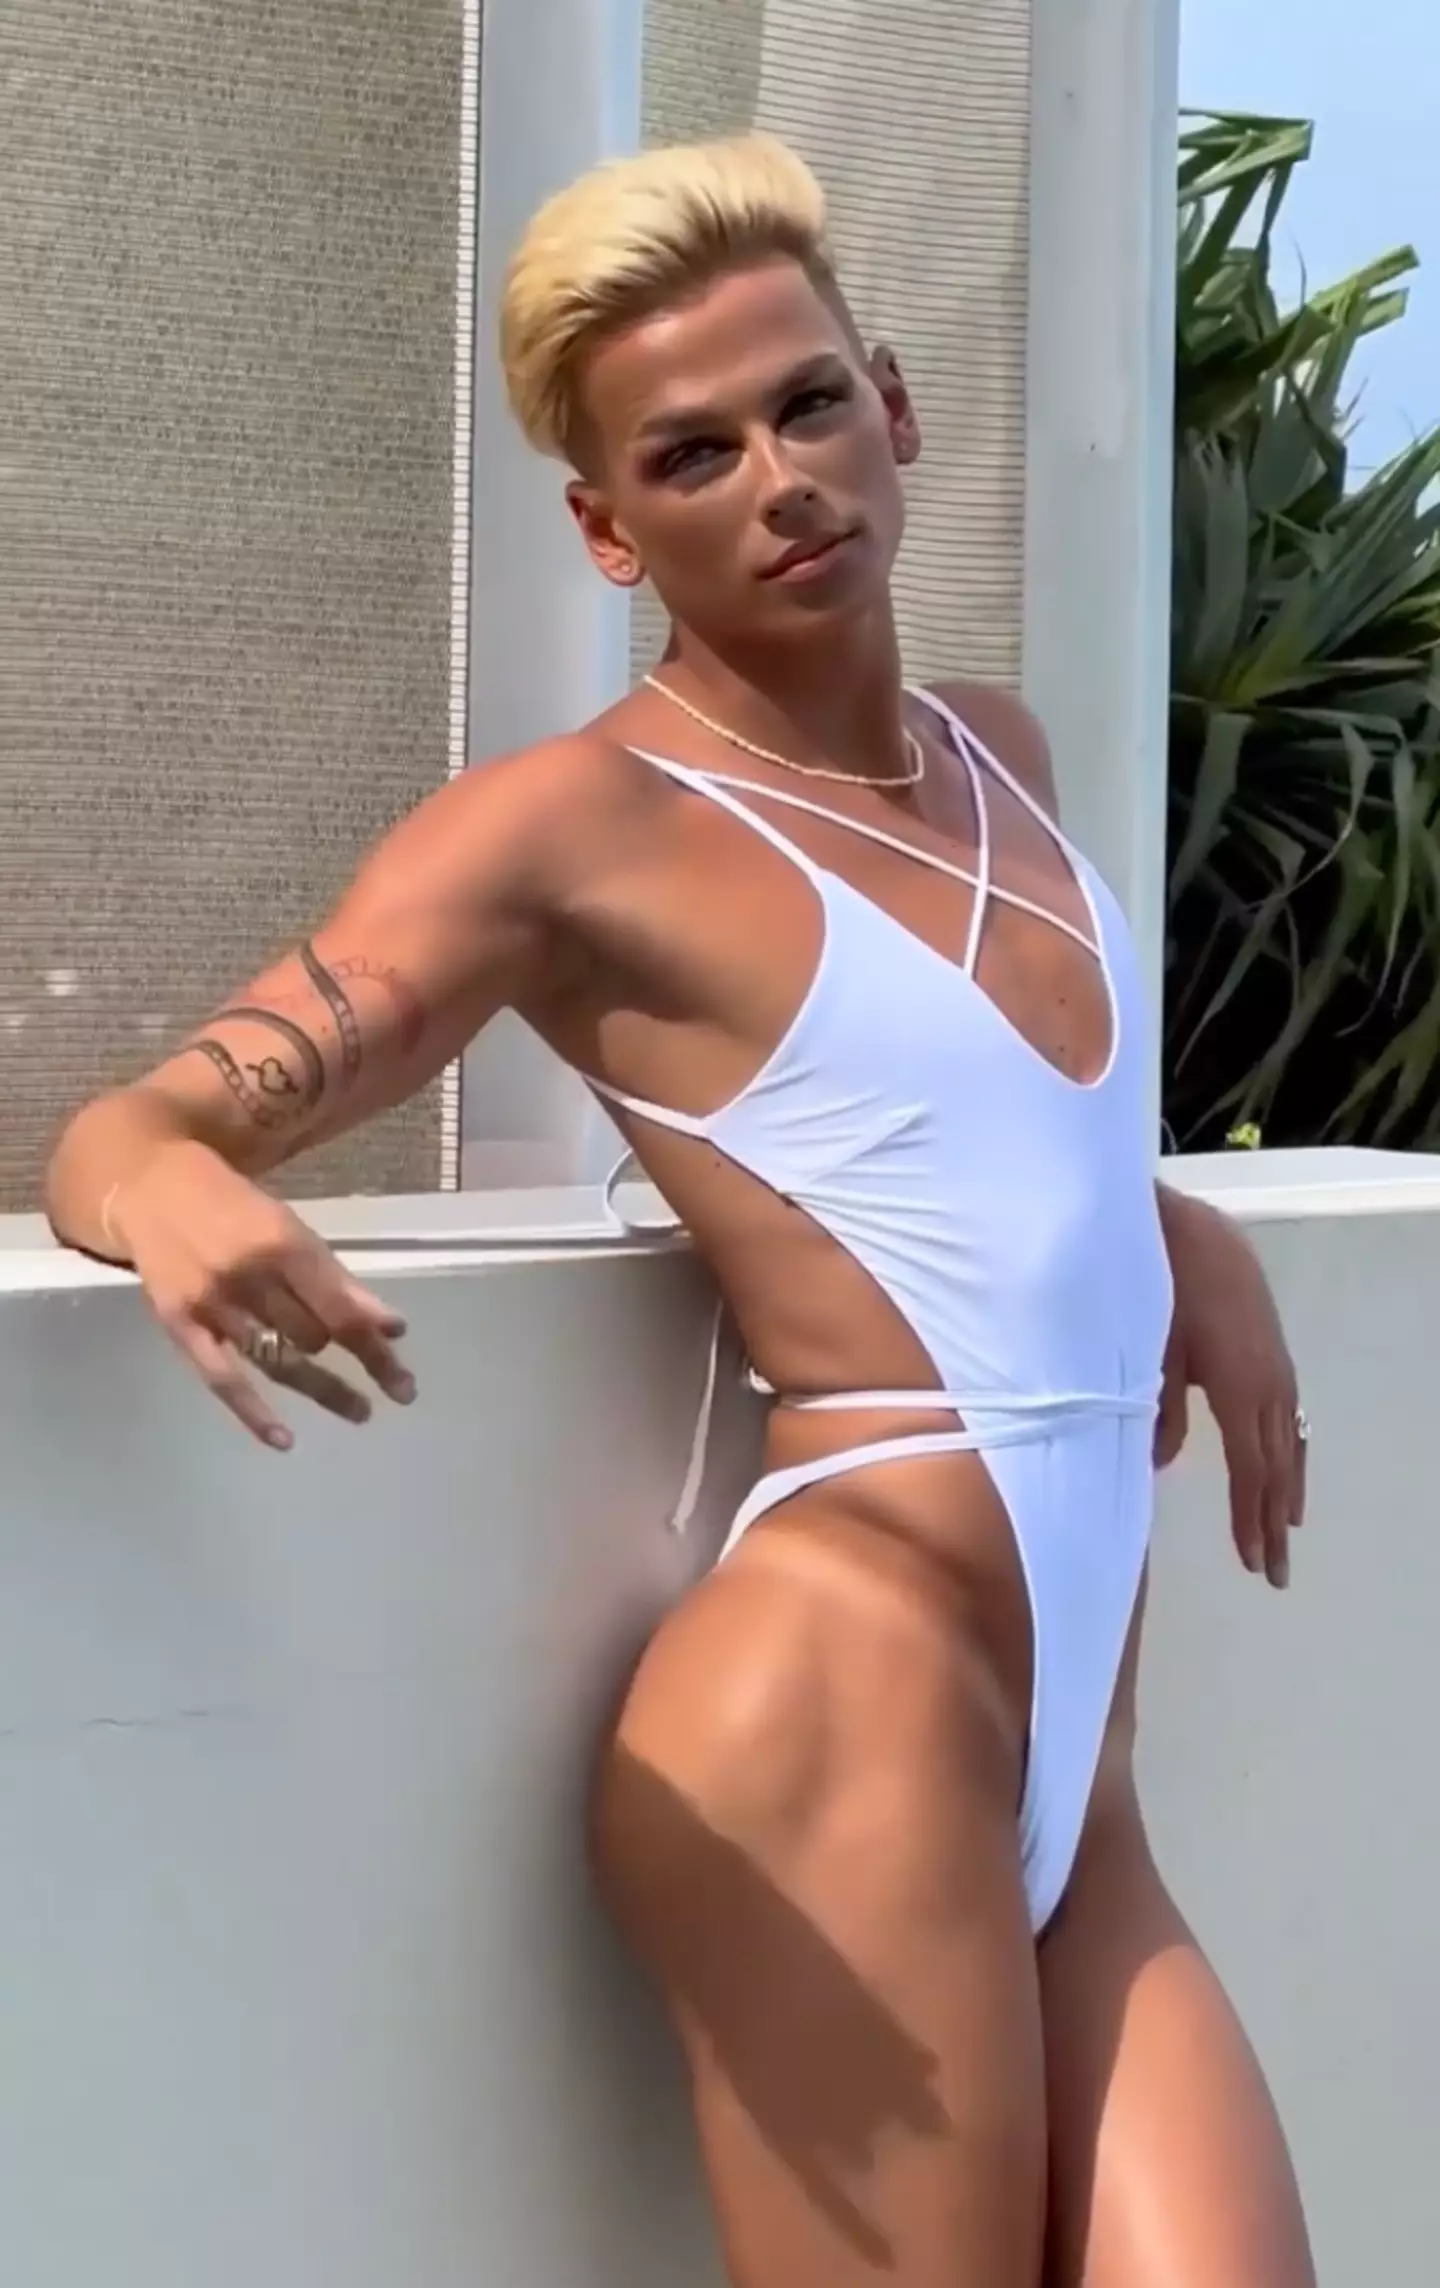 The video showed model Jake Young as he posed in the ‘Sugar Slinky One-Piece'.